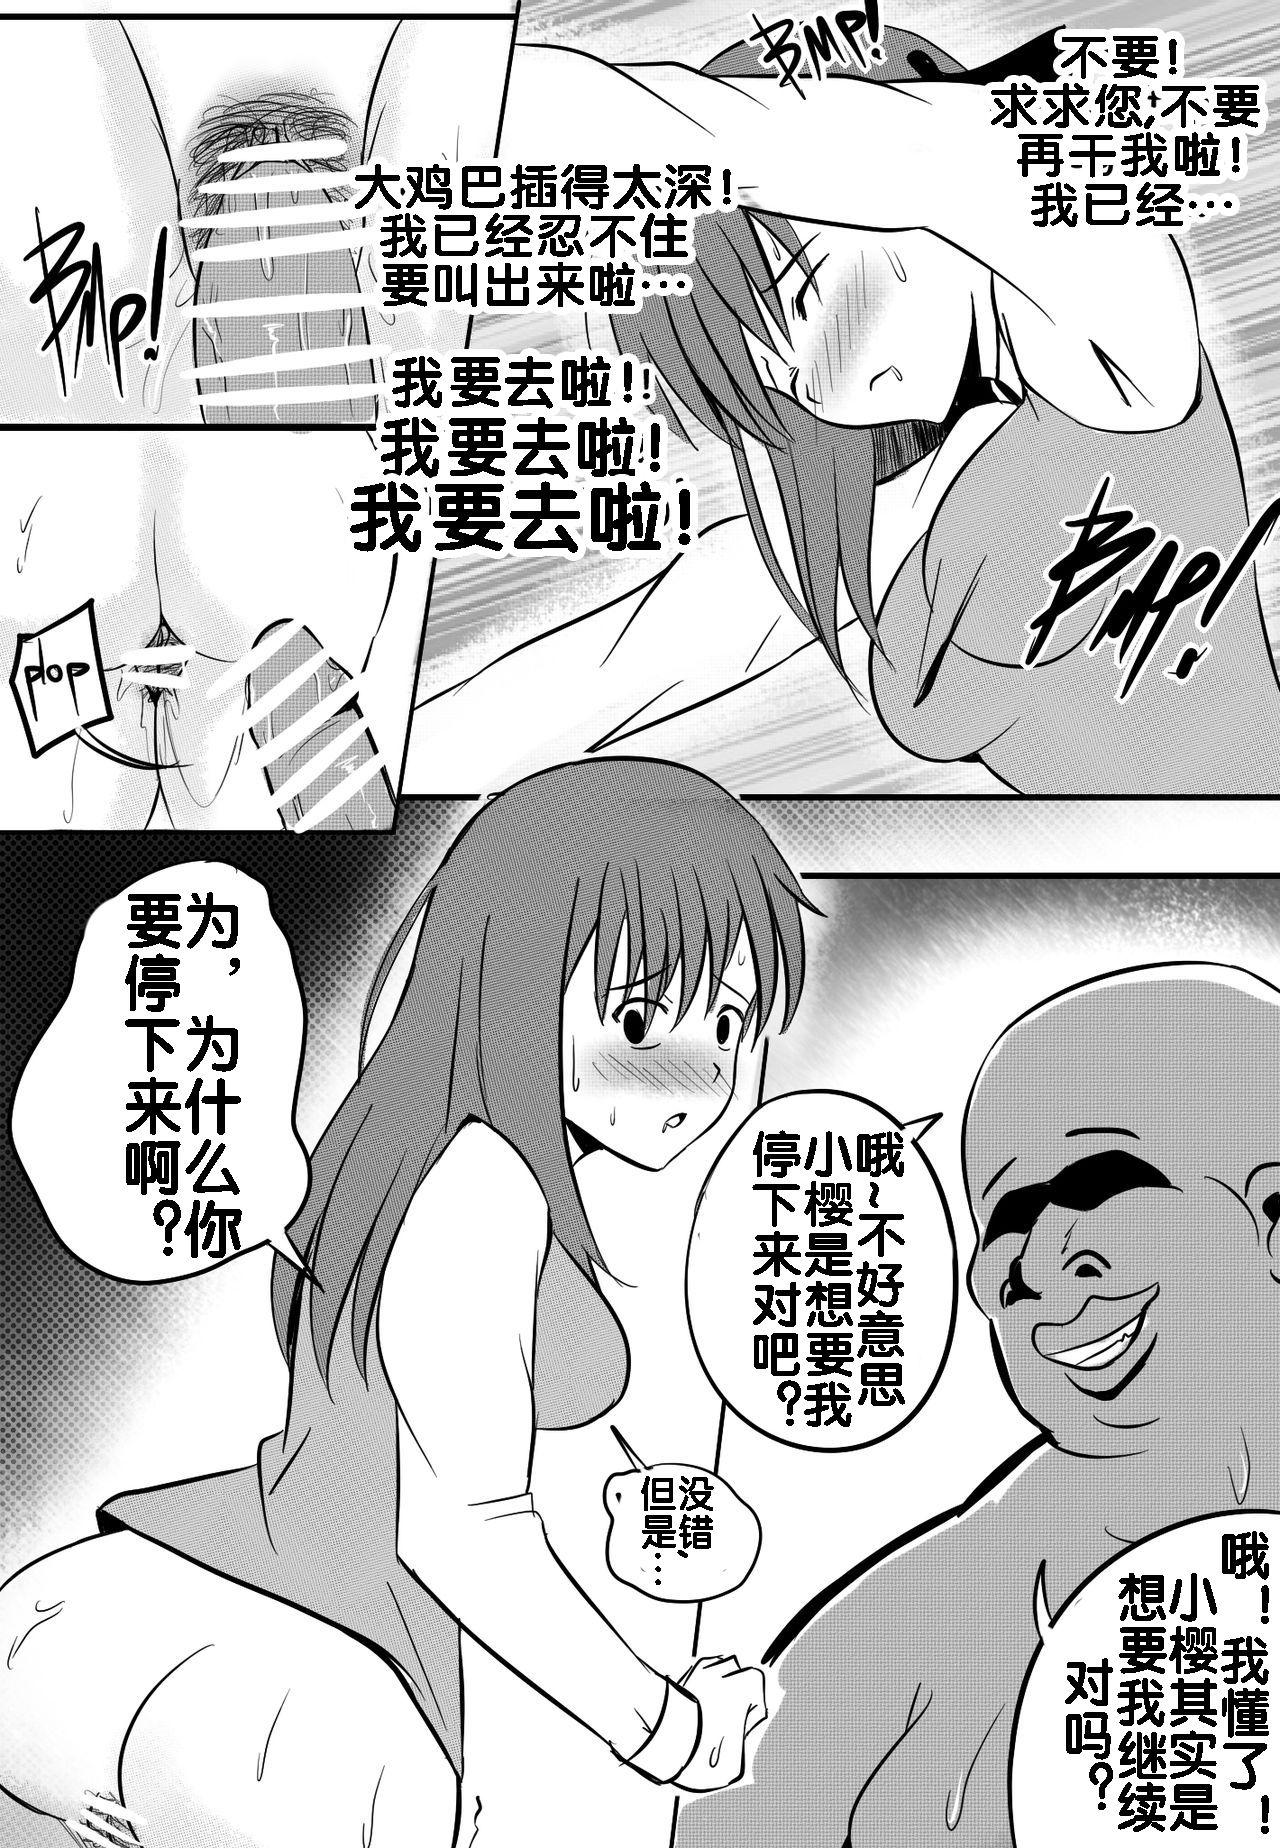 Oral Sex B-Trayal 10 - Fate stay night Small Boobs - Page 13